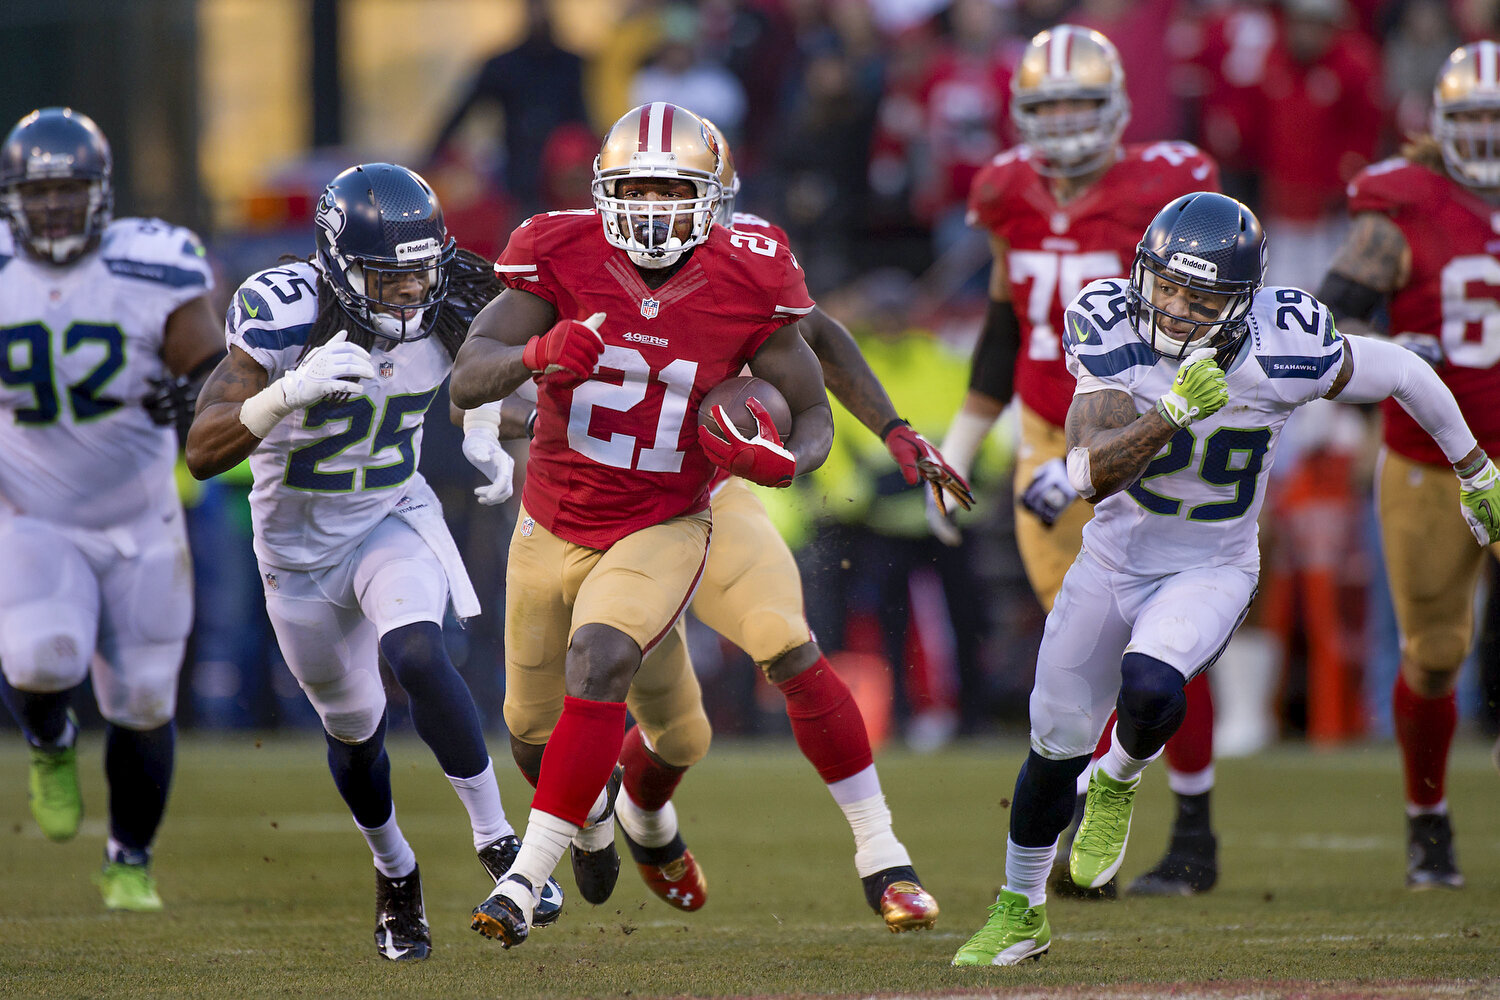  San Francisco 49ers running back Frank Gore (21) breaks free for a 51 yard run during the game between the 49ers and the Seattle Seahawks in San Francisco on Sunday, December 8, 2013. The run set up the final field goal which put the 49ers ahead 19-